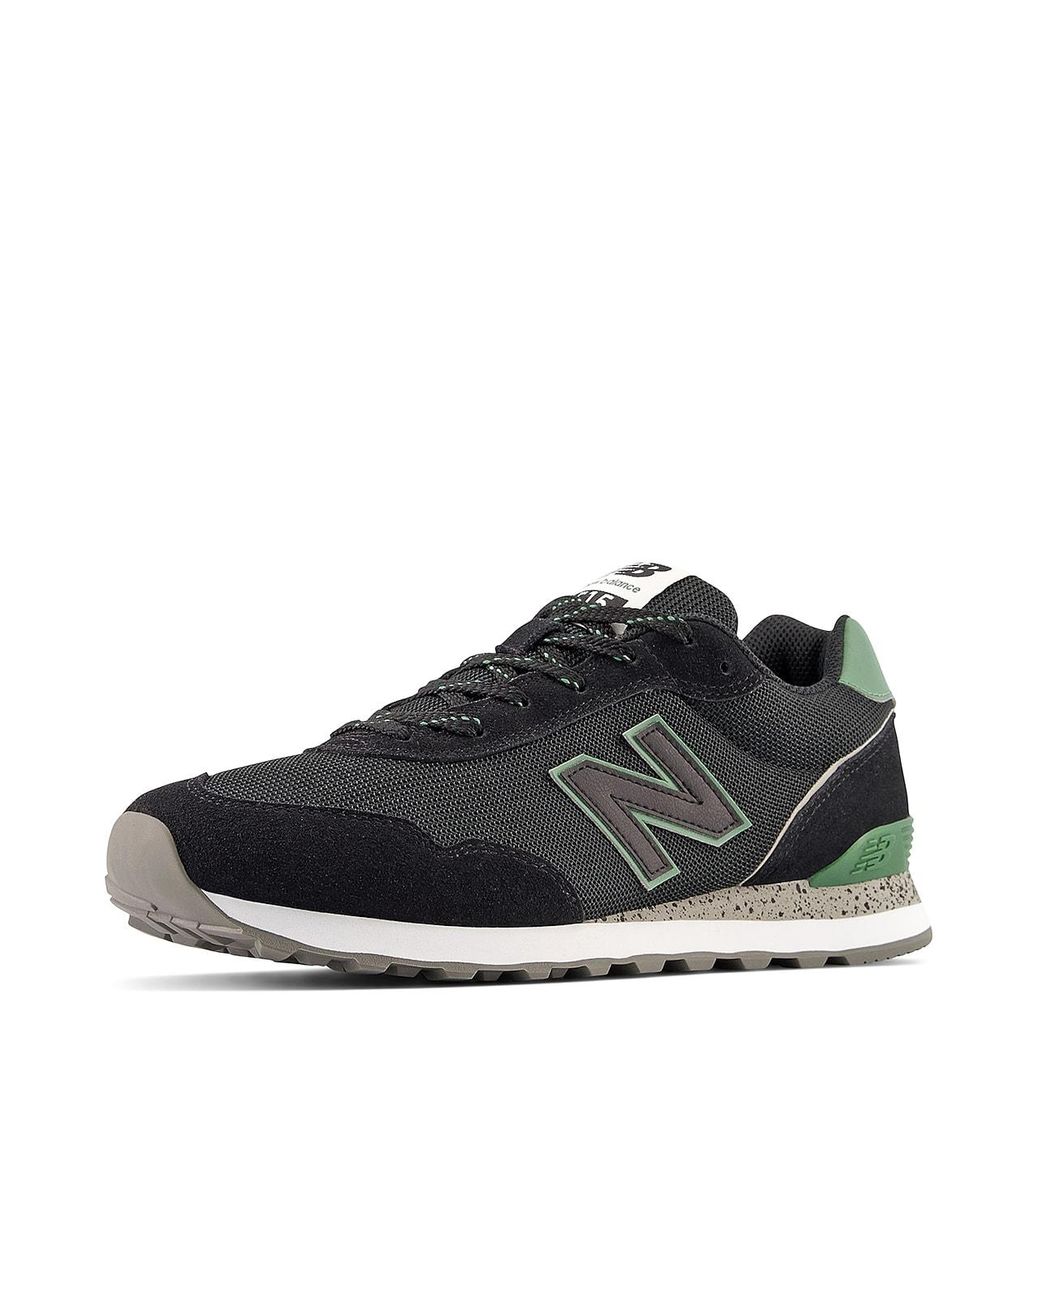 New Balance Suede 515 V3 Sneaker in Metallic for Men Save 61% Mens Trainers New Balance Trainers 